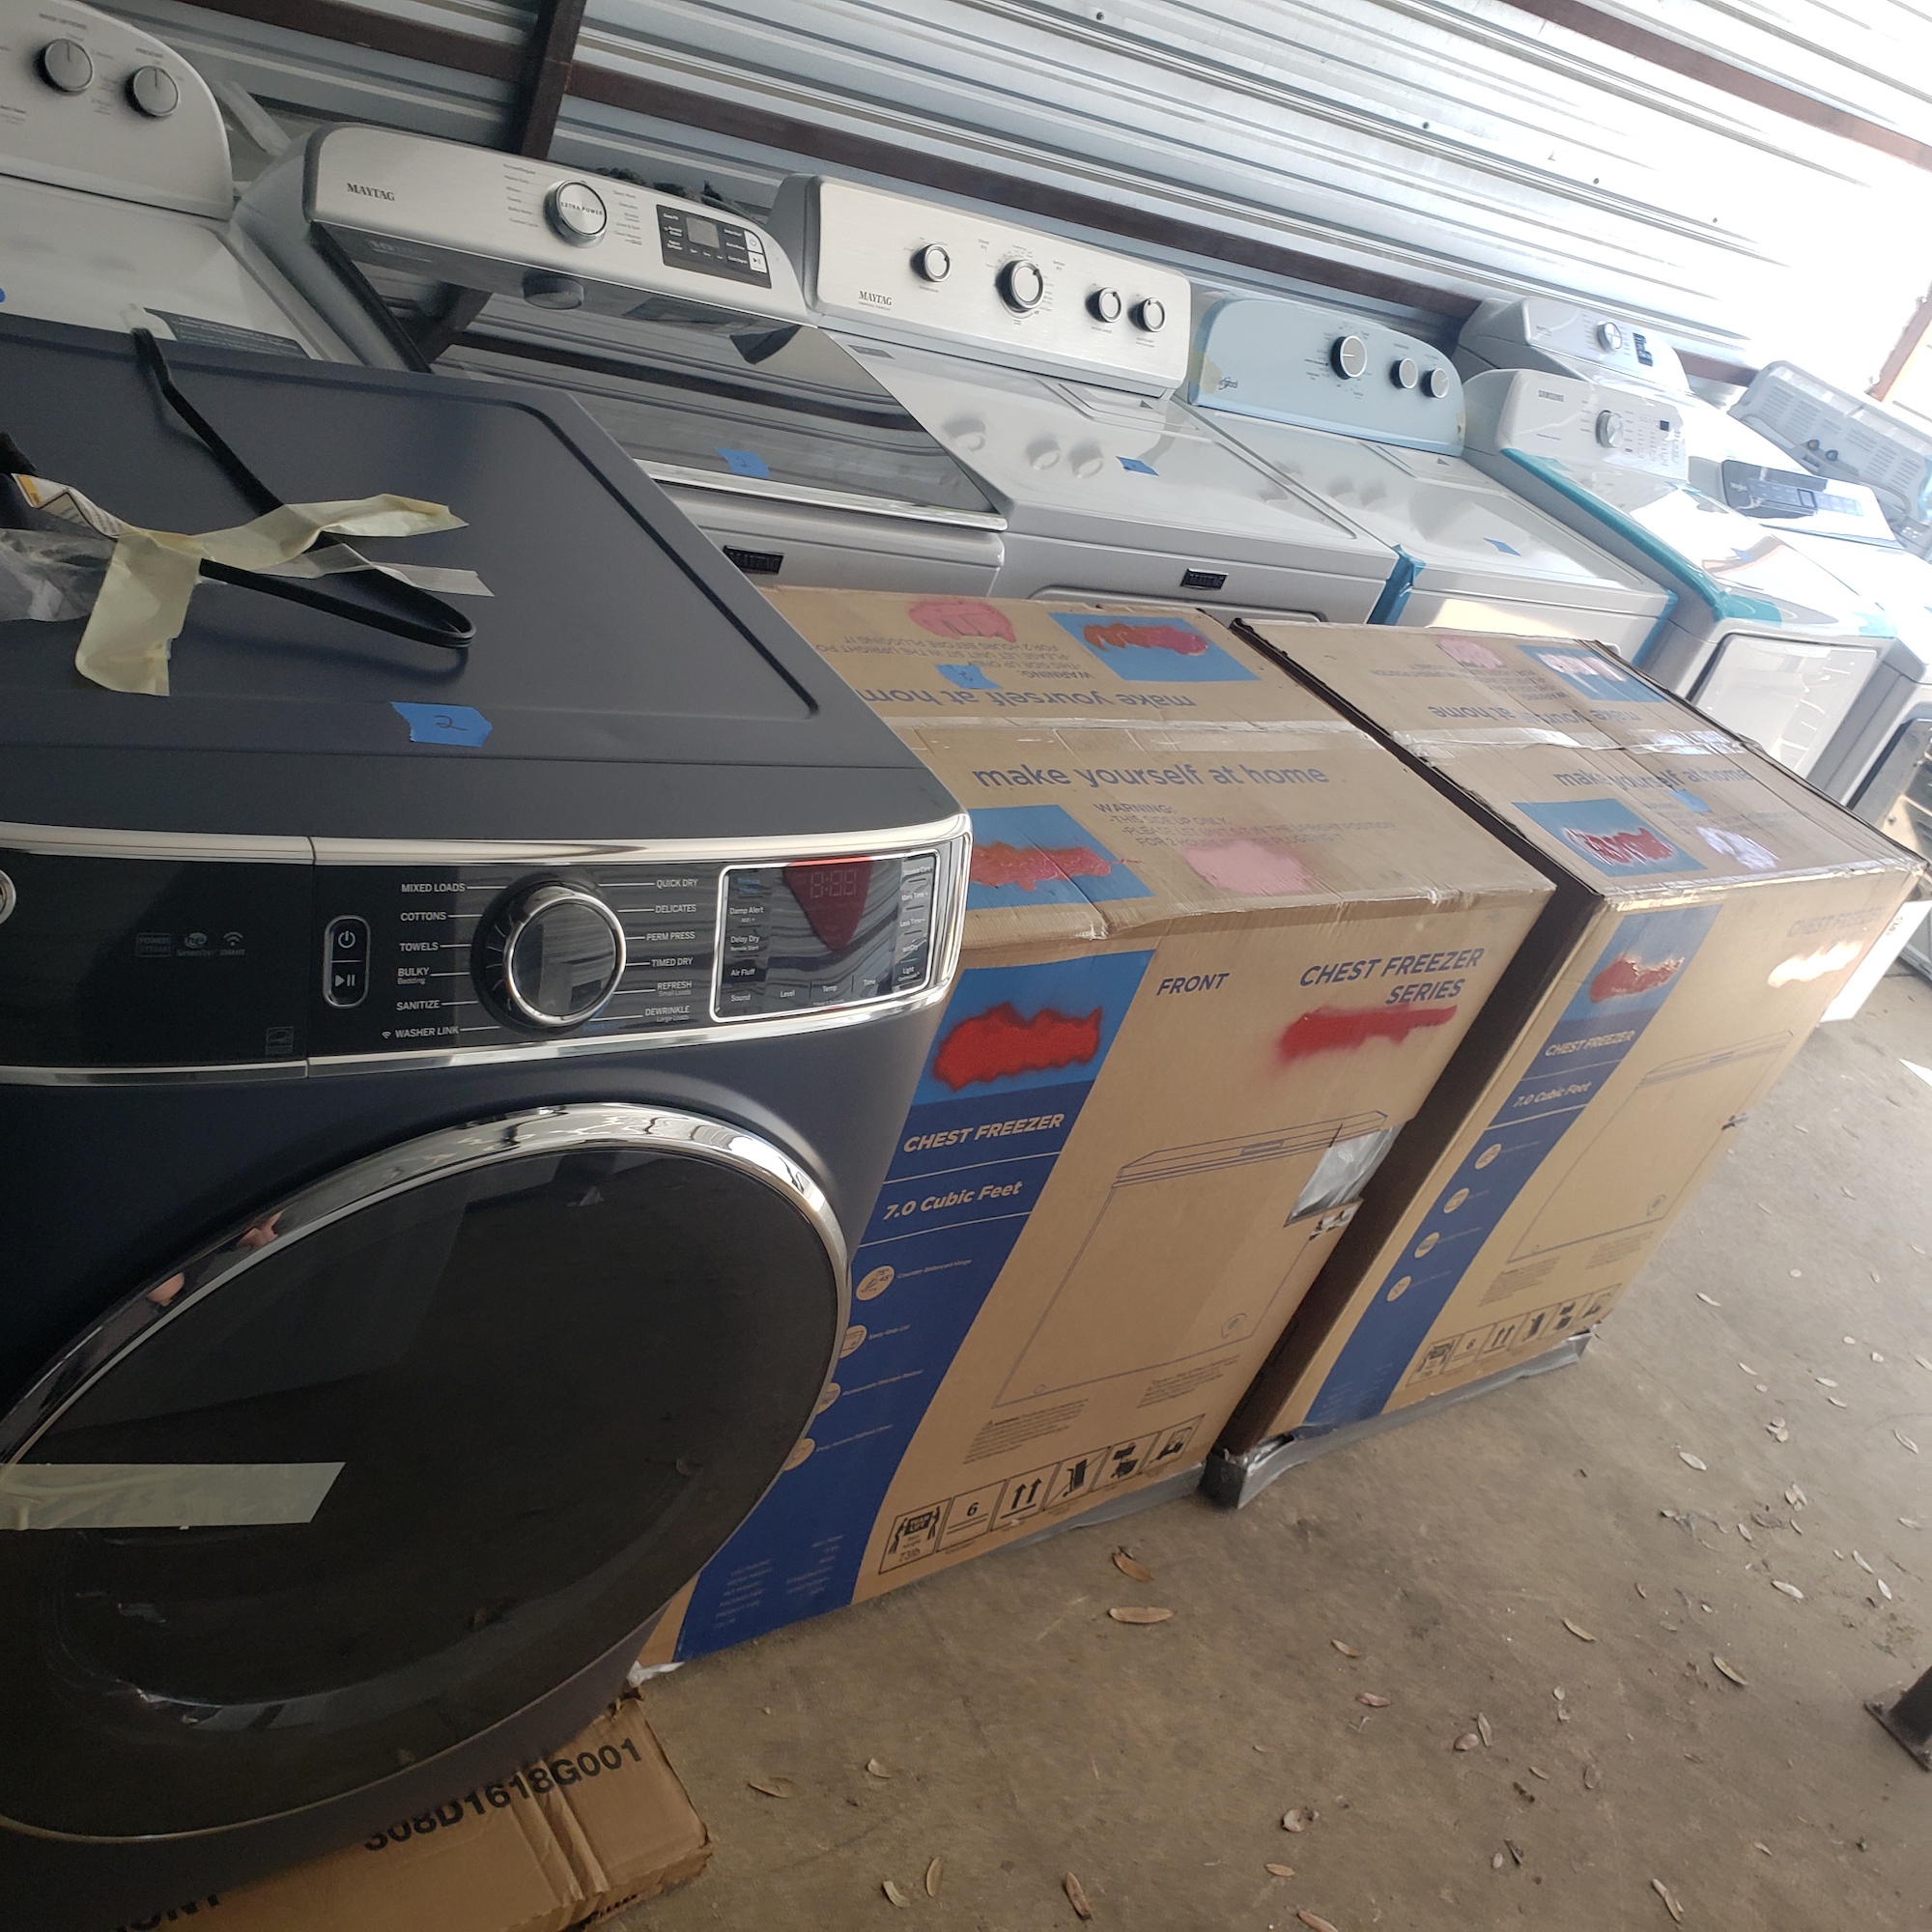 example pictures of Another Bulk order of appliances shipped to one of our customers in our wholesale group.